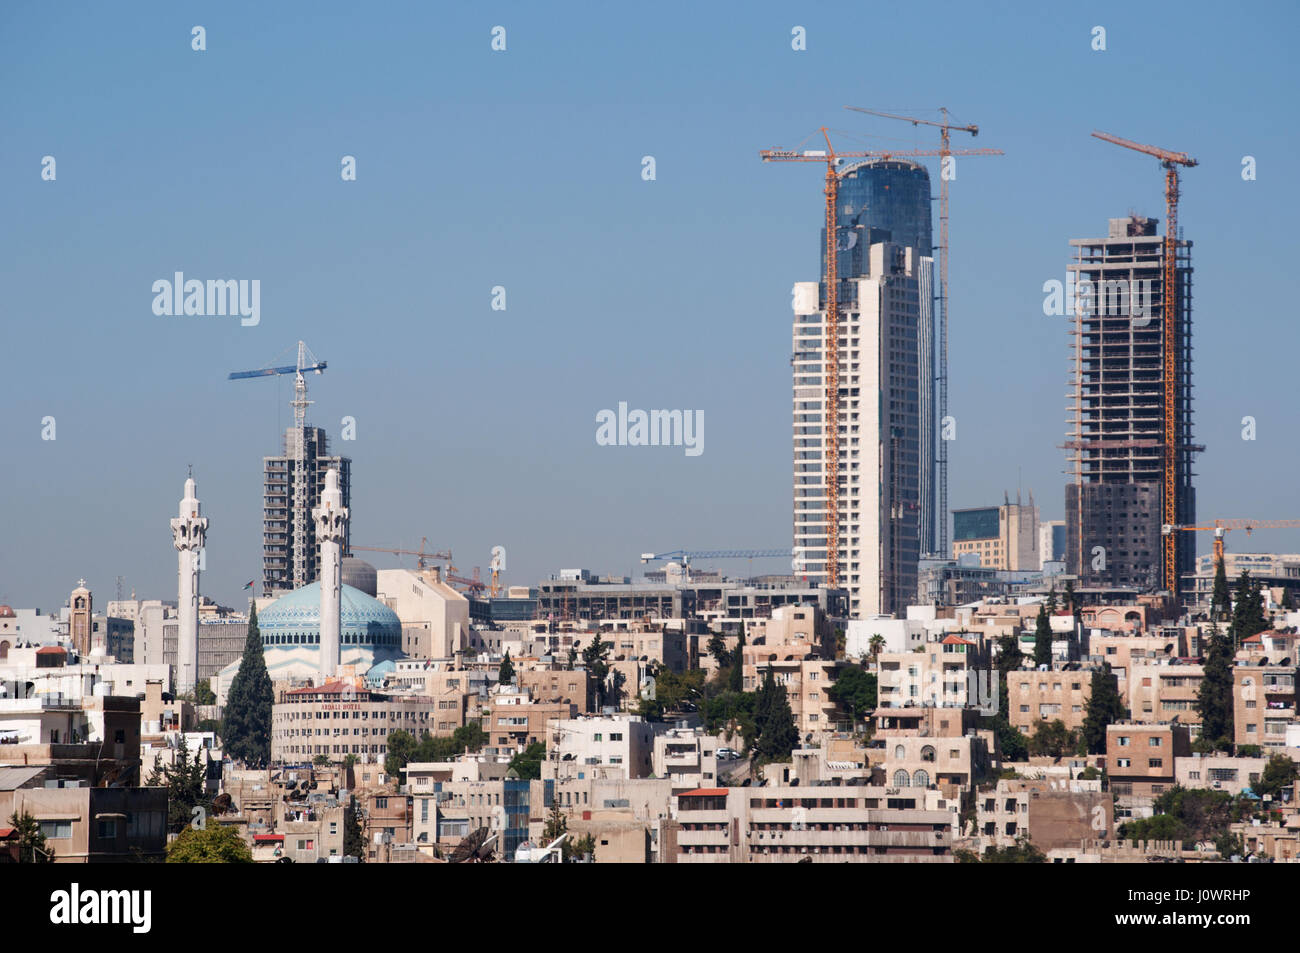 most populous city of Stock Photo 